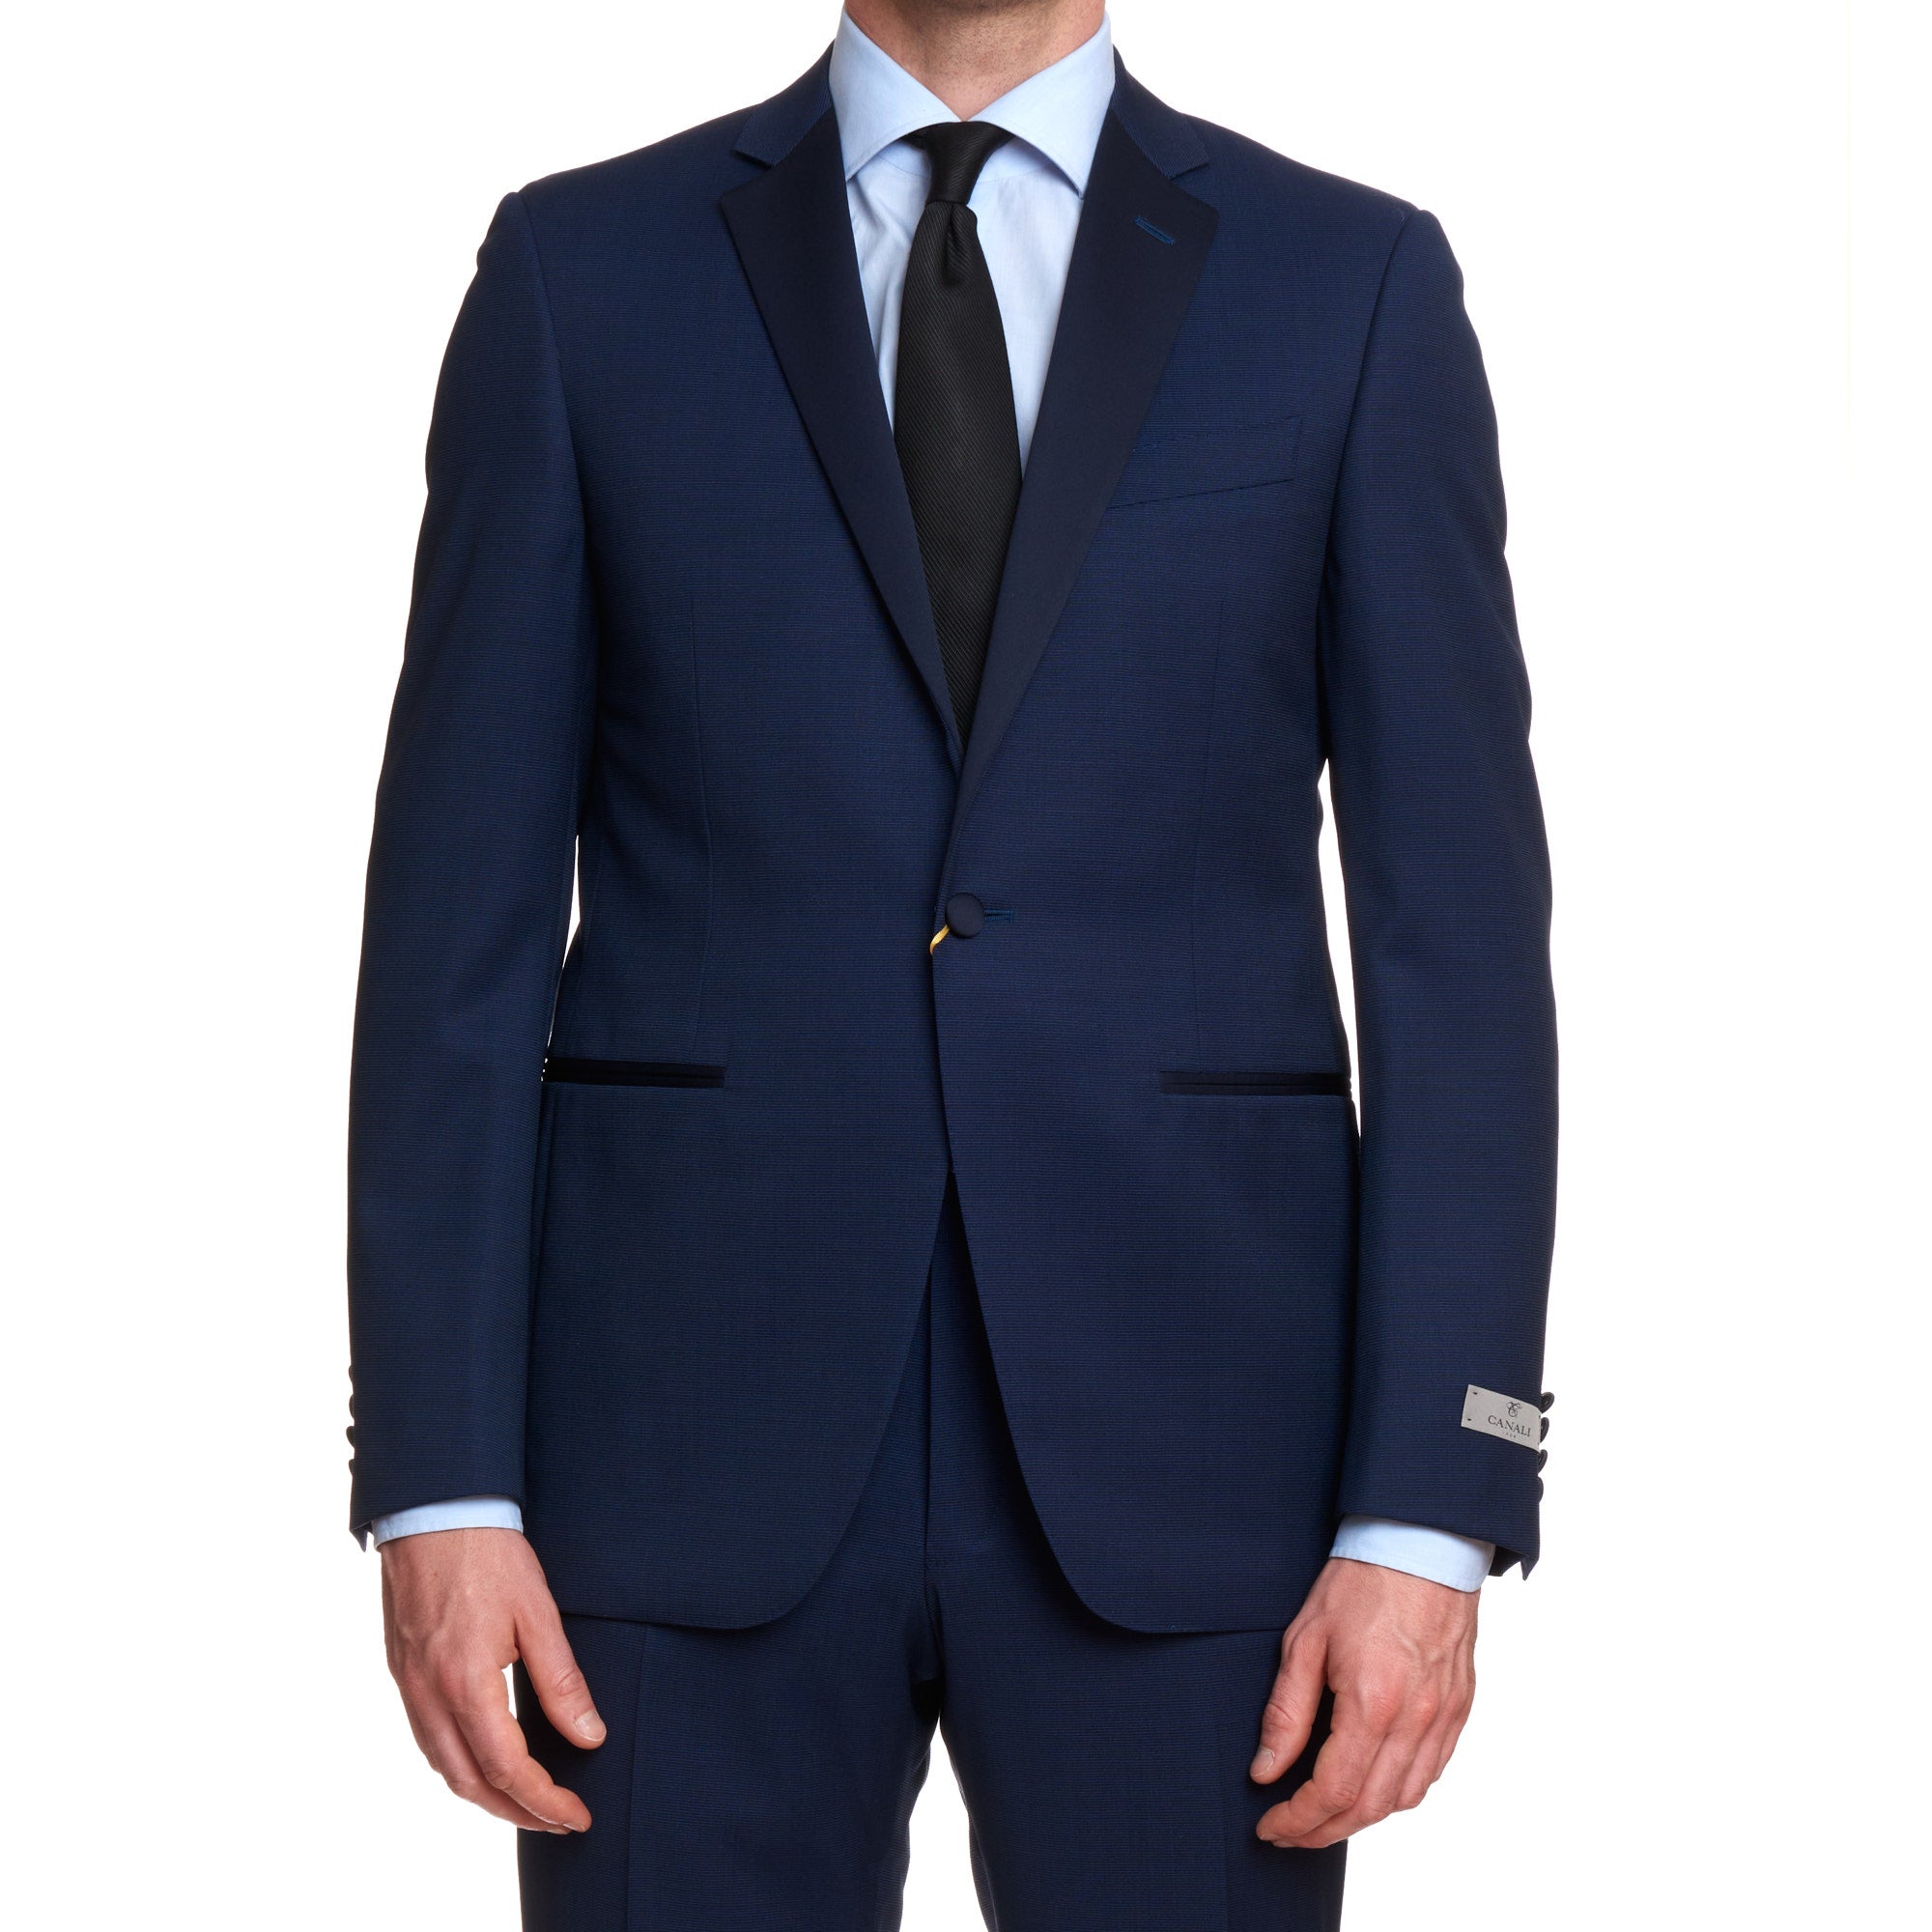 CANALI 1934 Navy Blue Water Resistant Wool 1 Button Formal Suit EU 50 US 40 Slim Fit CANALI